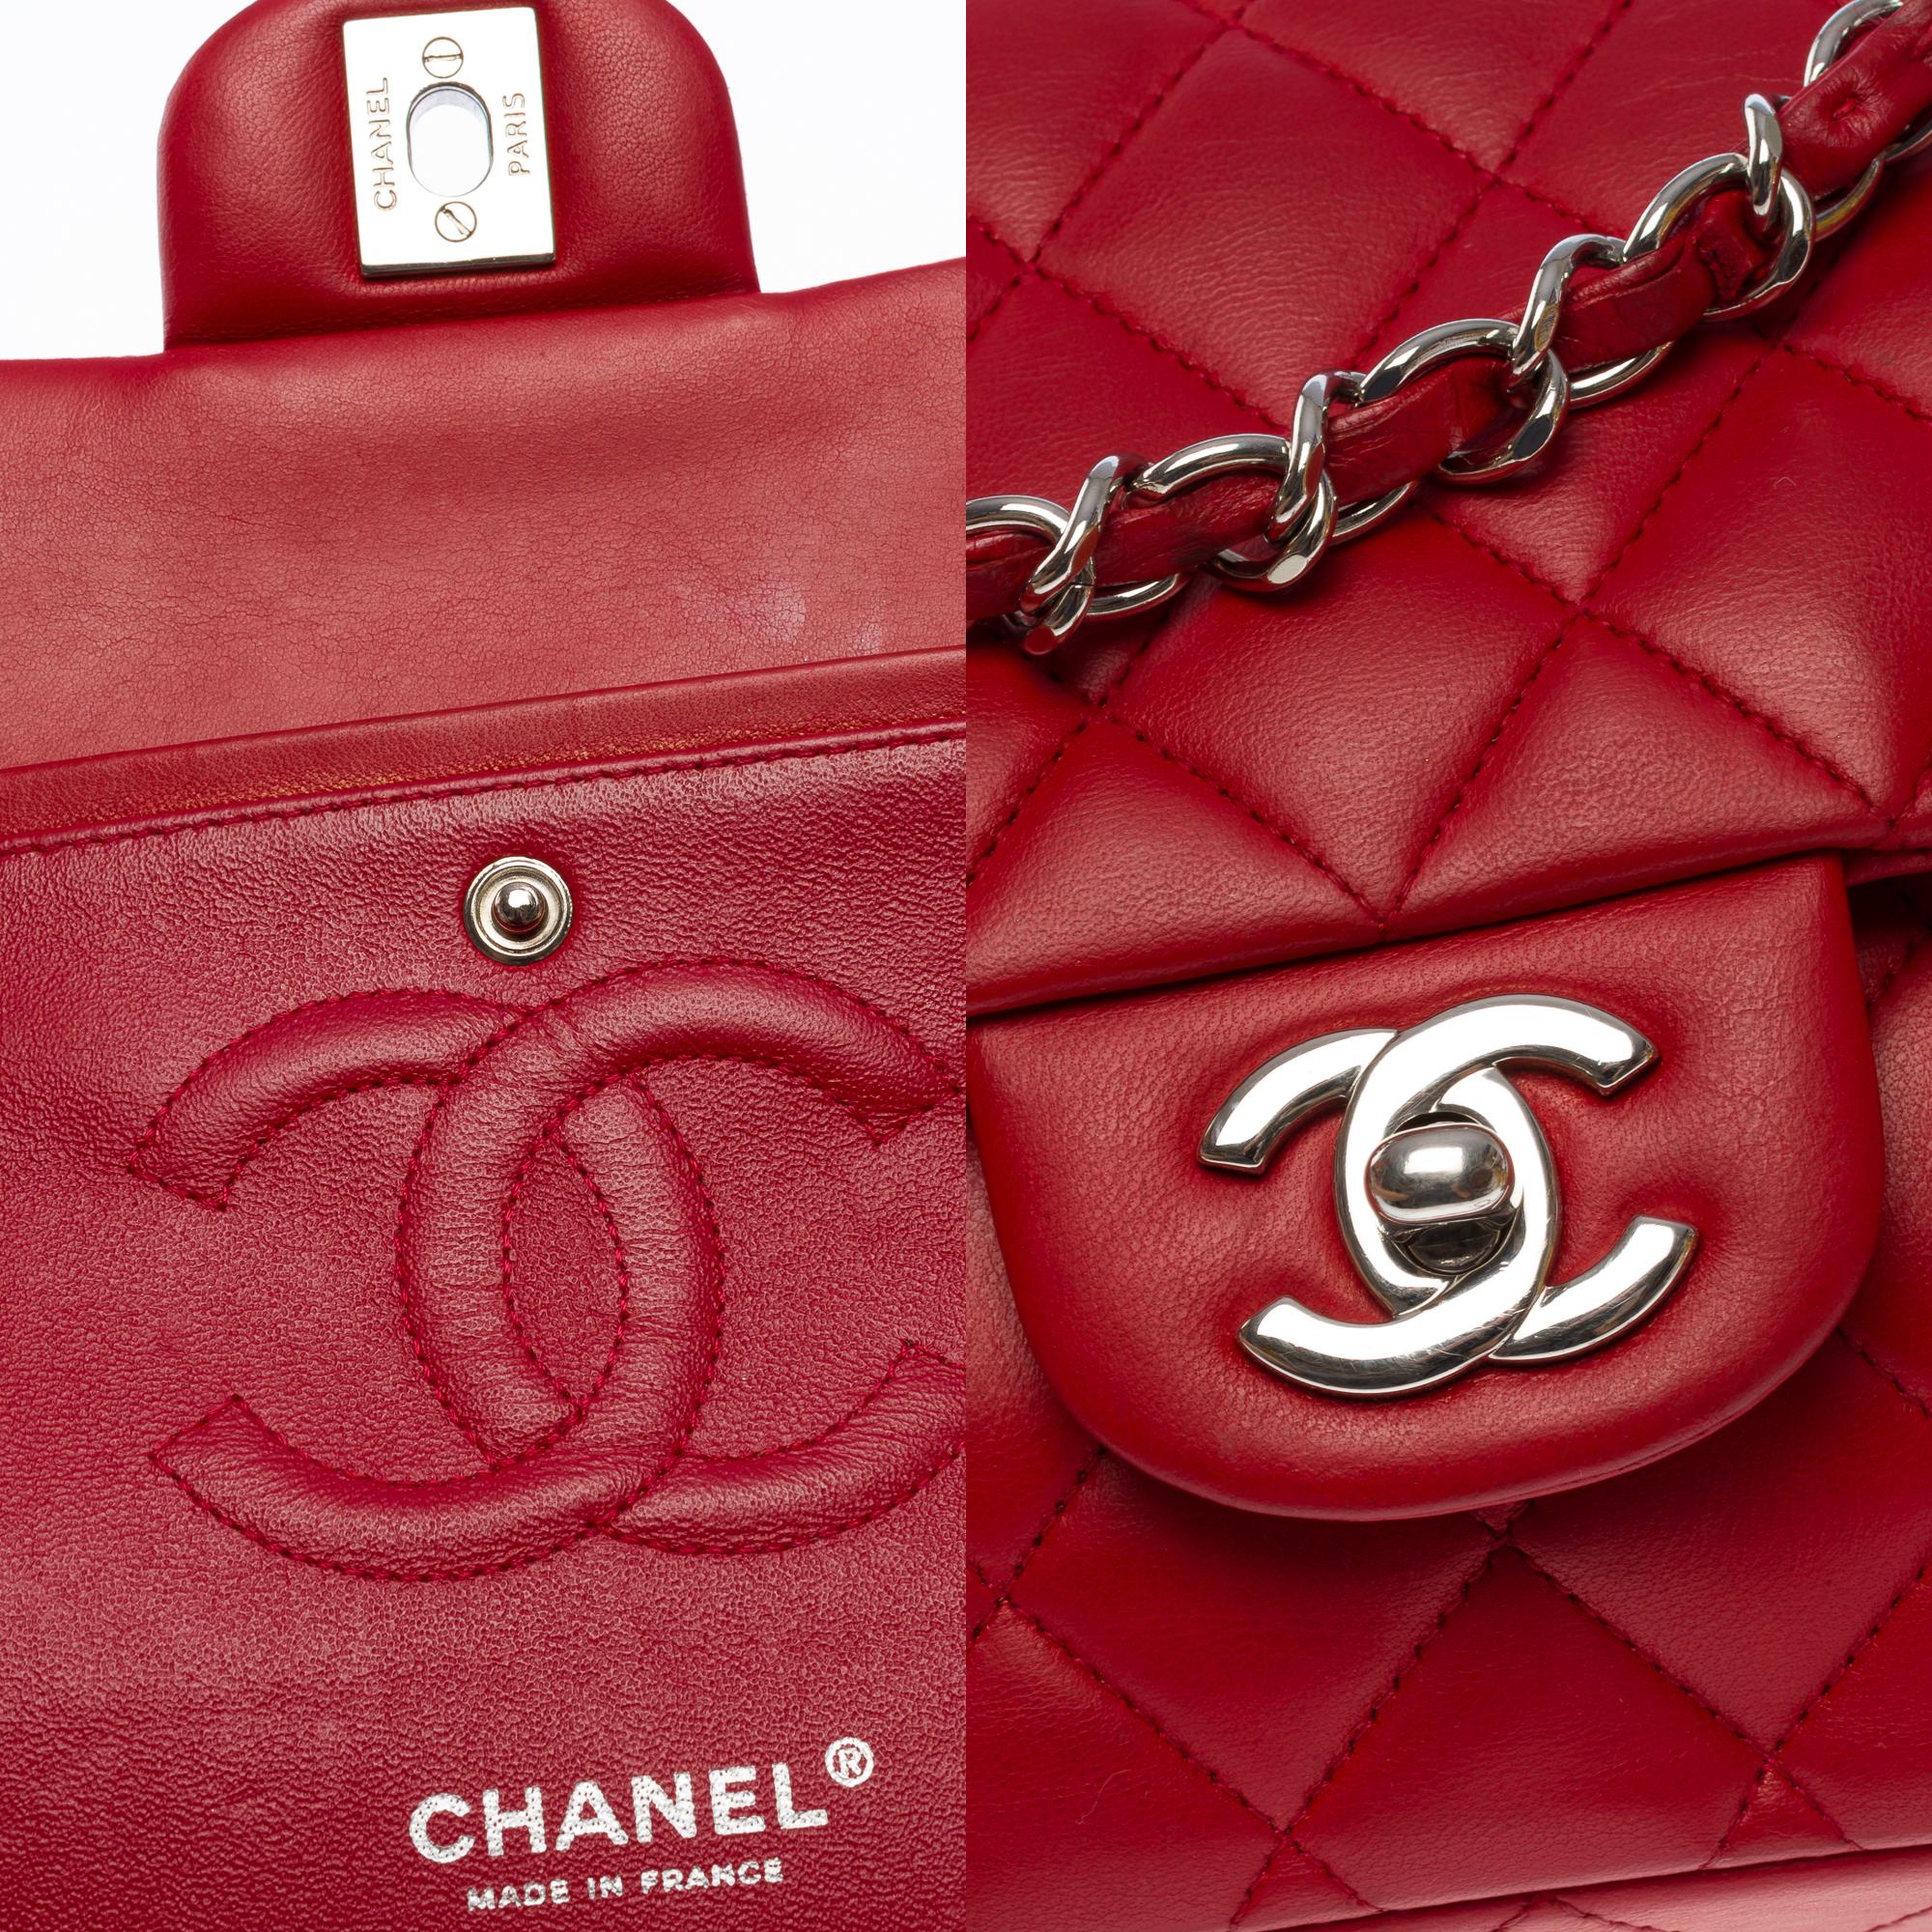 Chanel Timeless Medium double flap shoulder bag in Red lambskin leather, SHW For Sale 2